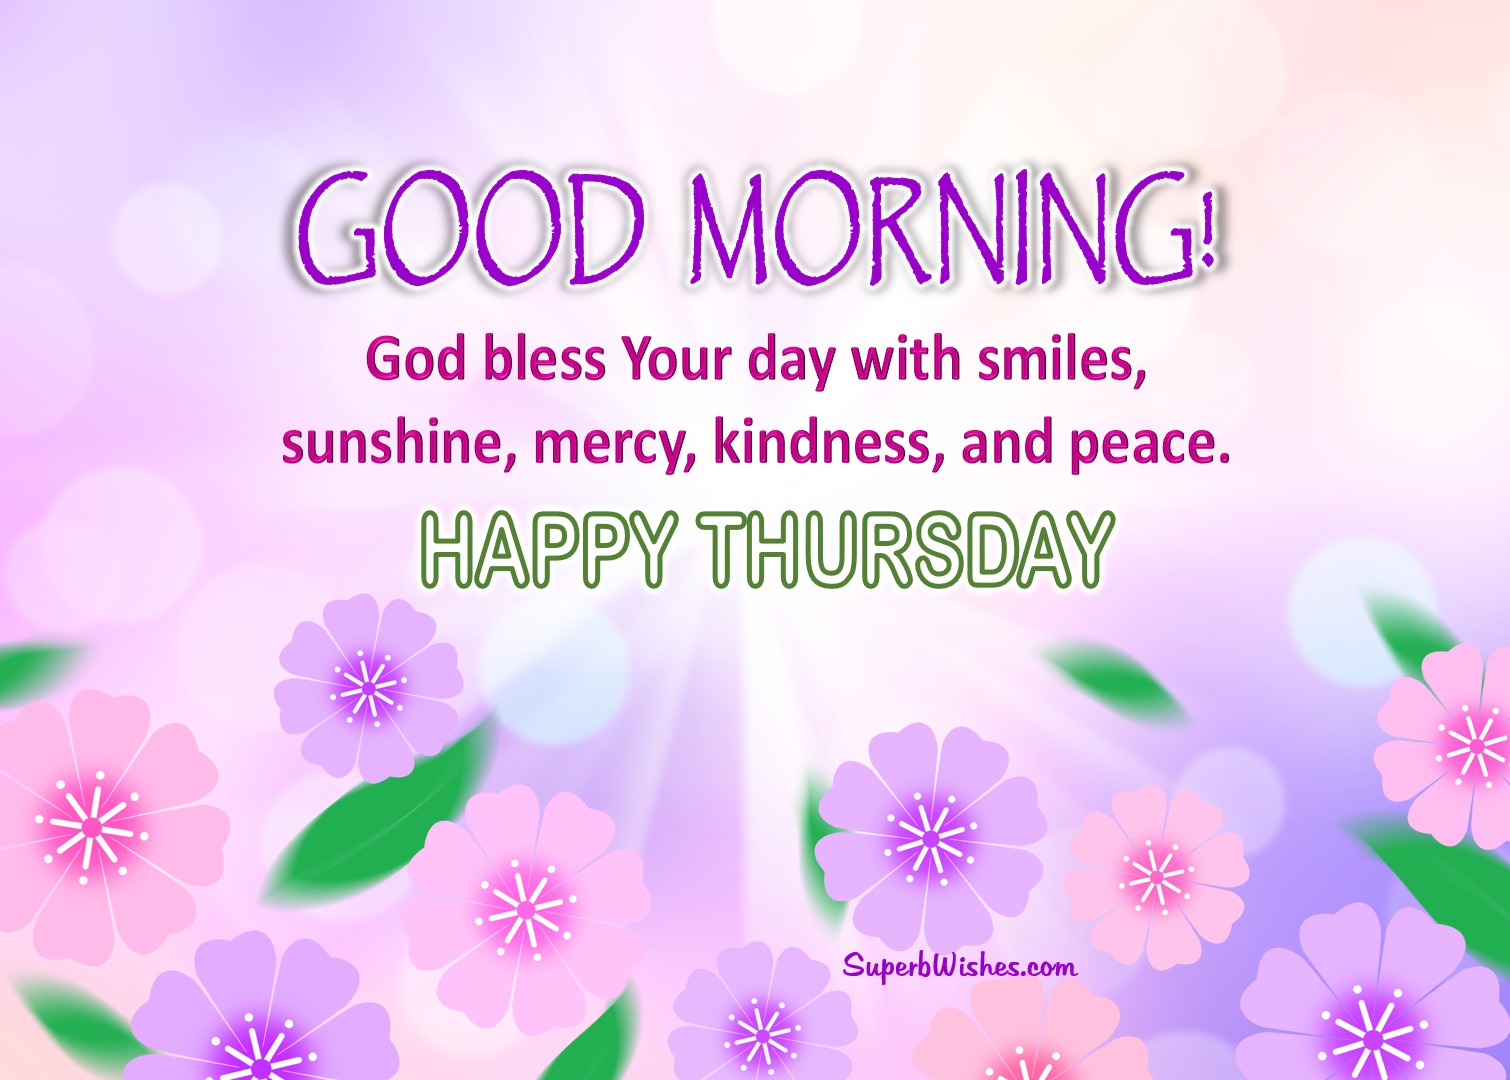 Happy Thursday Images - Don't Worry Be Happy | SuperbWishes.com